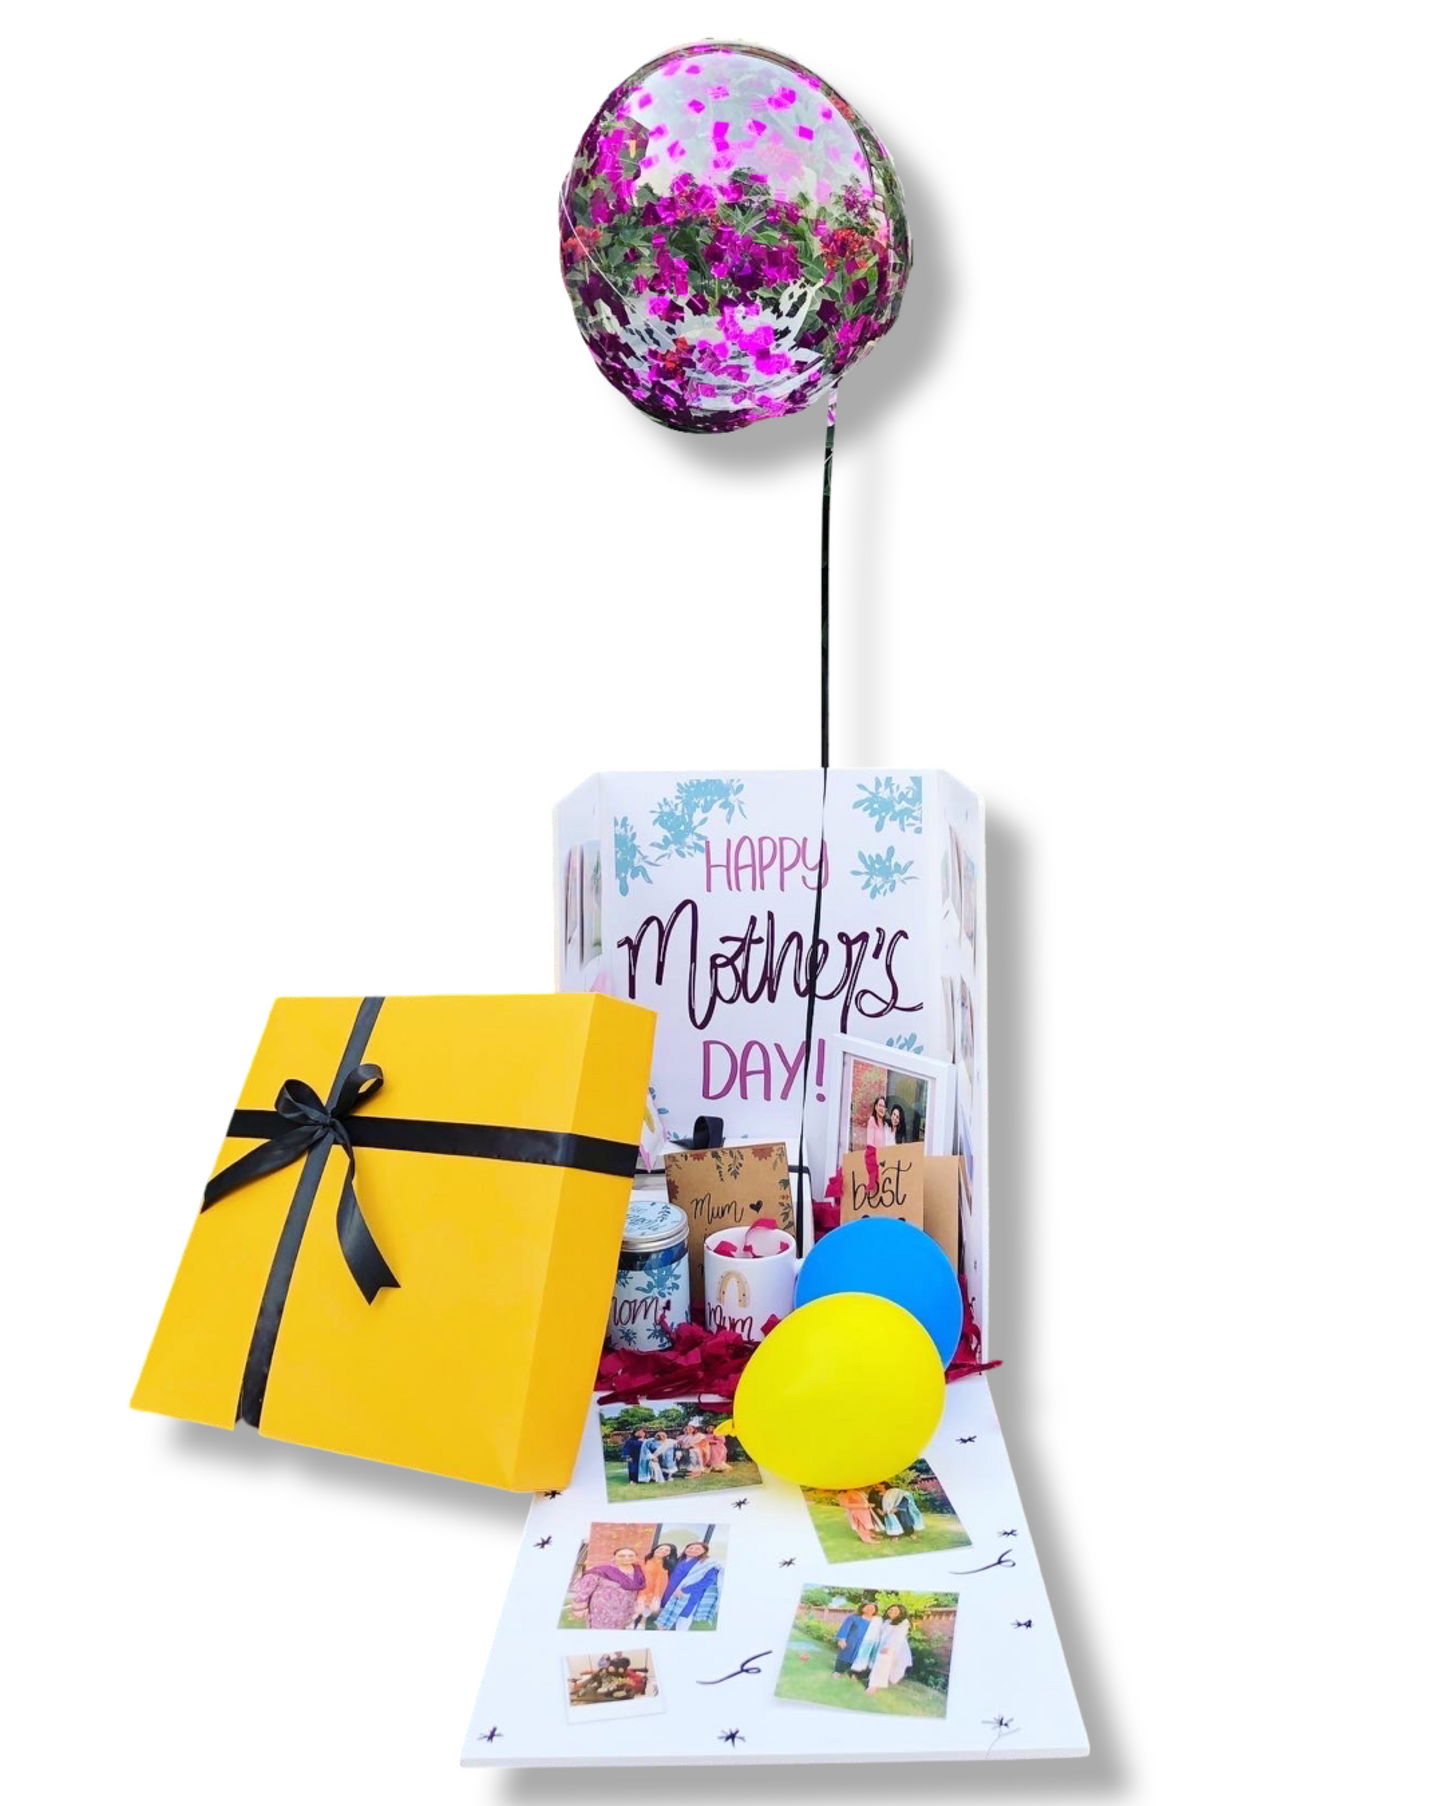 Mother's Day Surprise Box - Only LHE